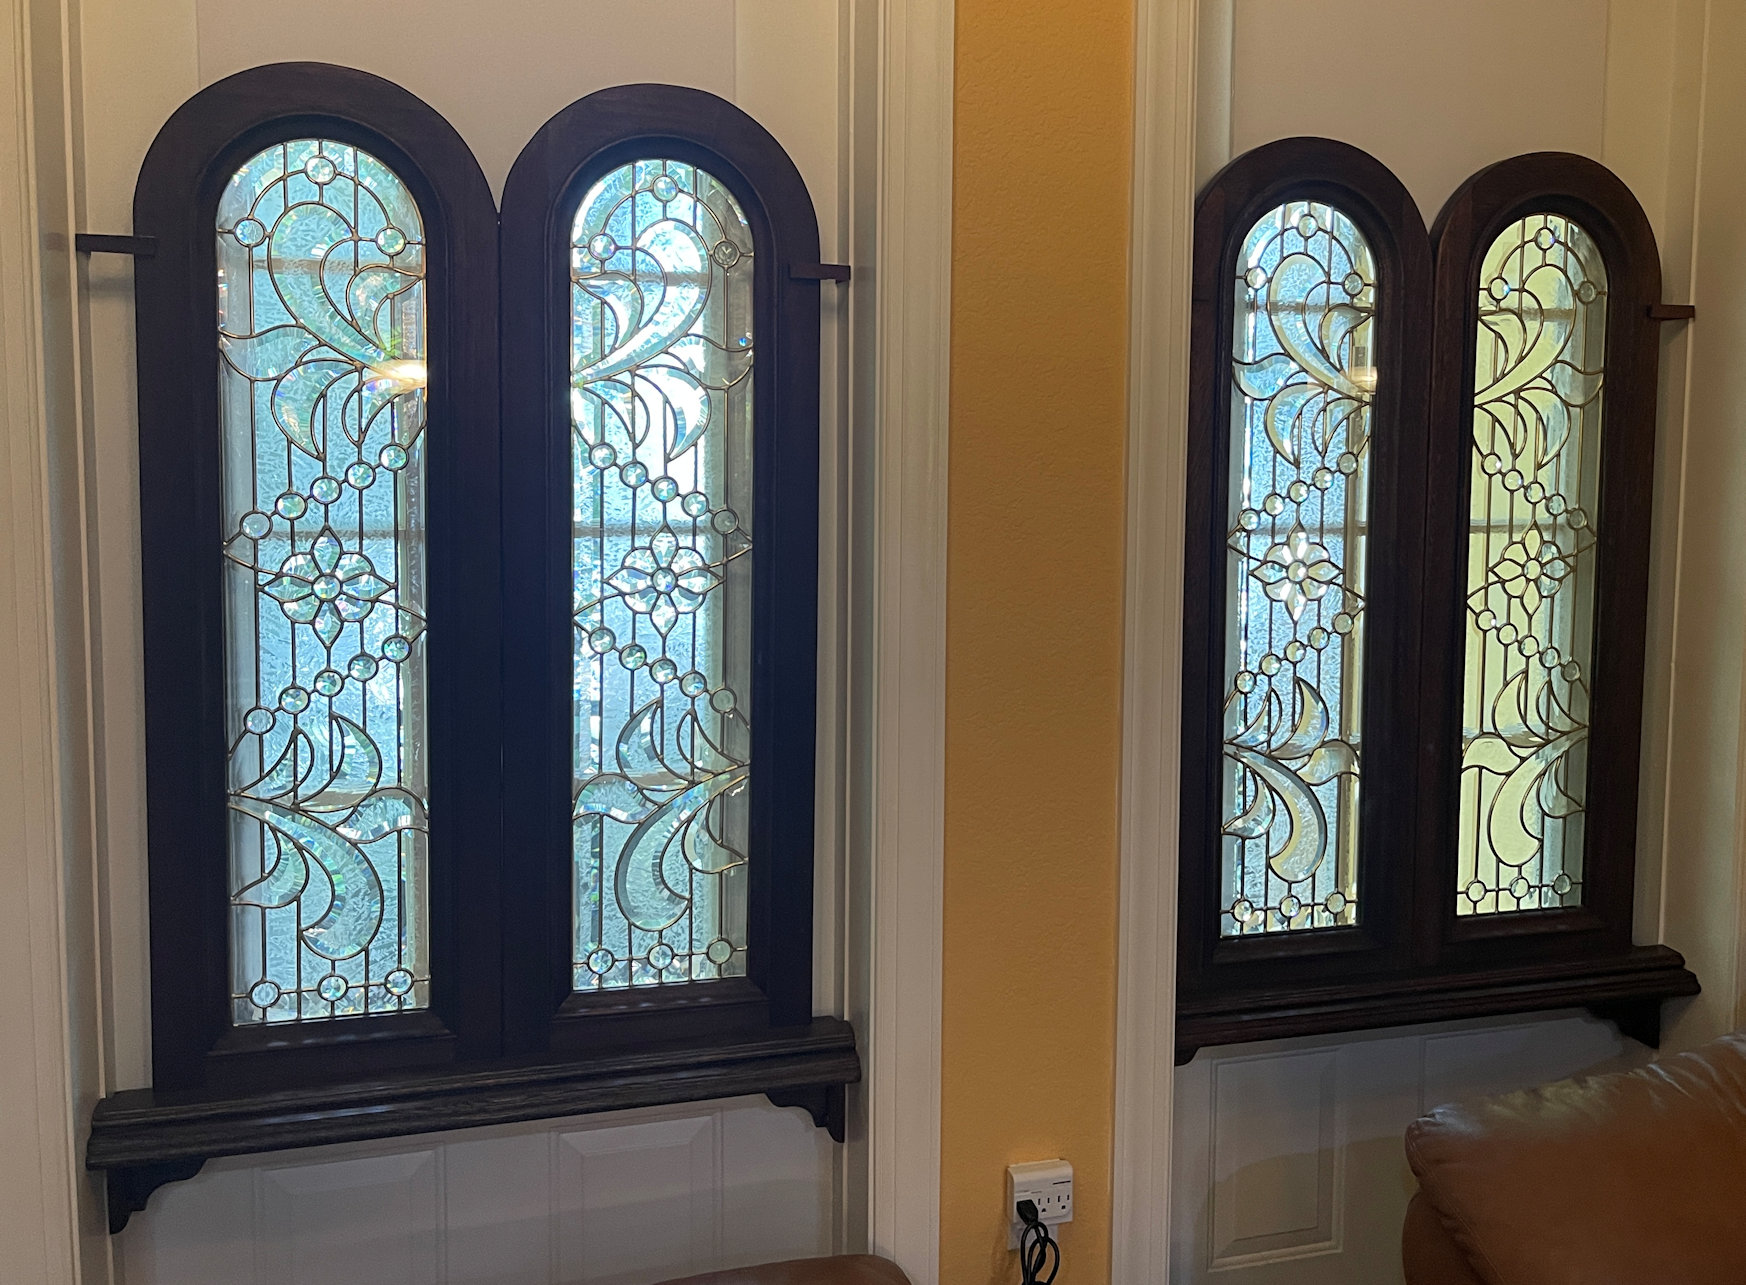 4 LEADED GLASS ARCHED WINDOWS: